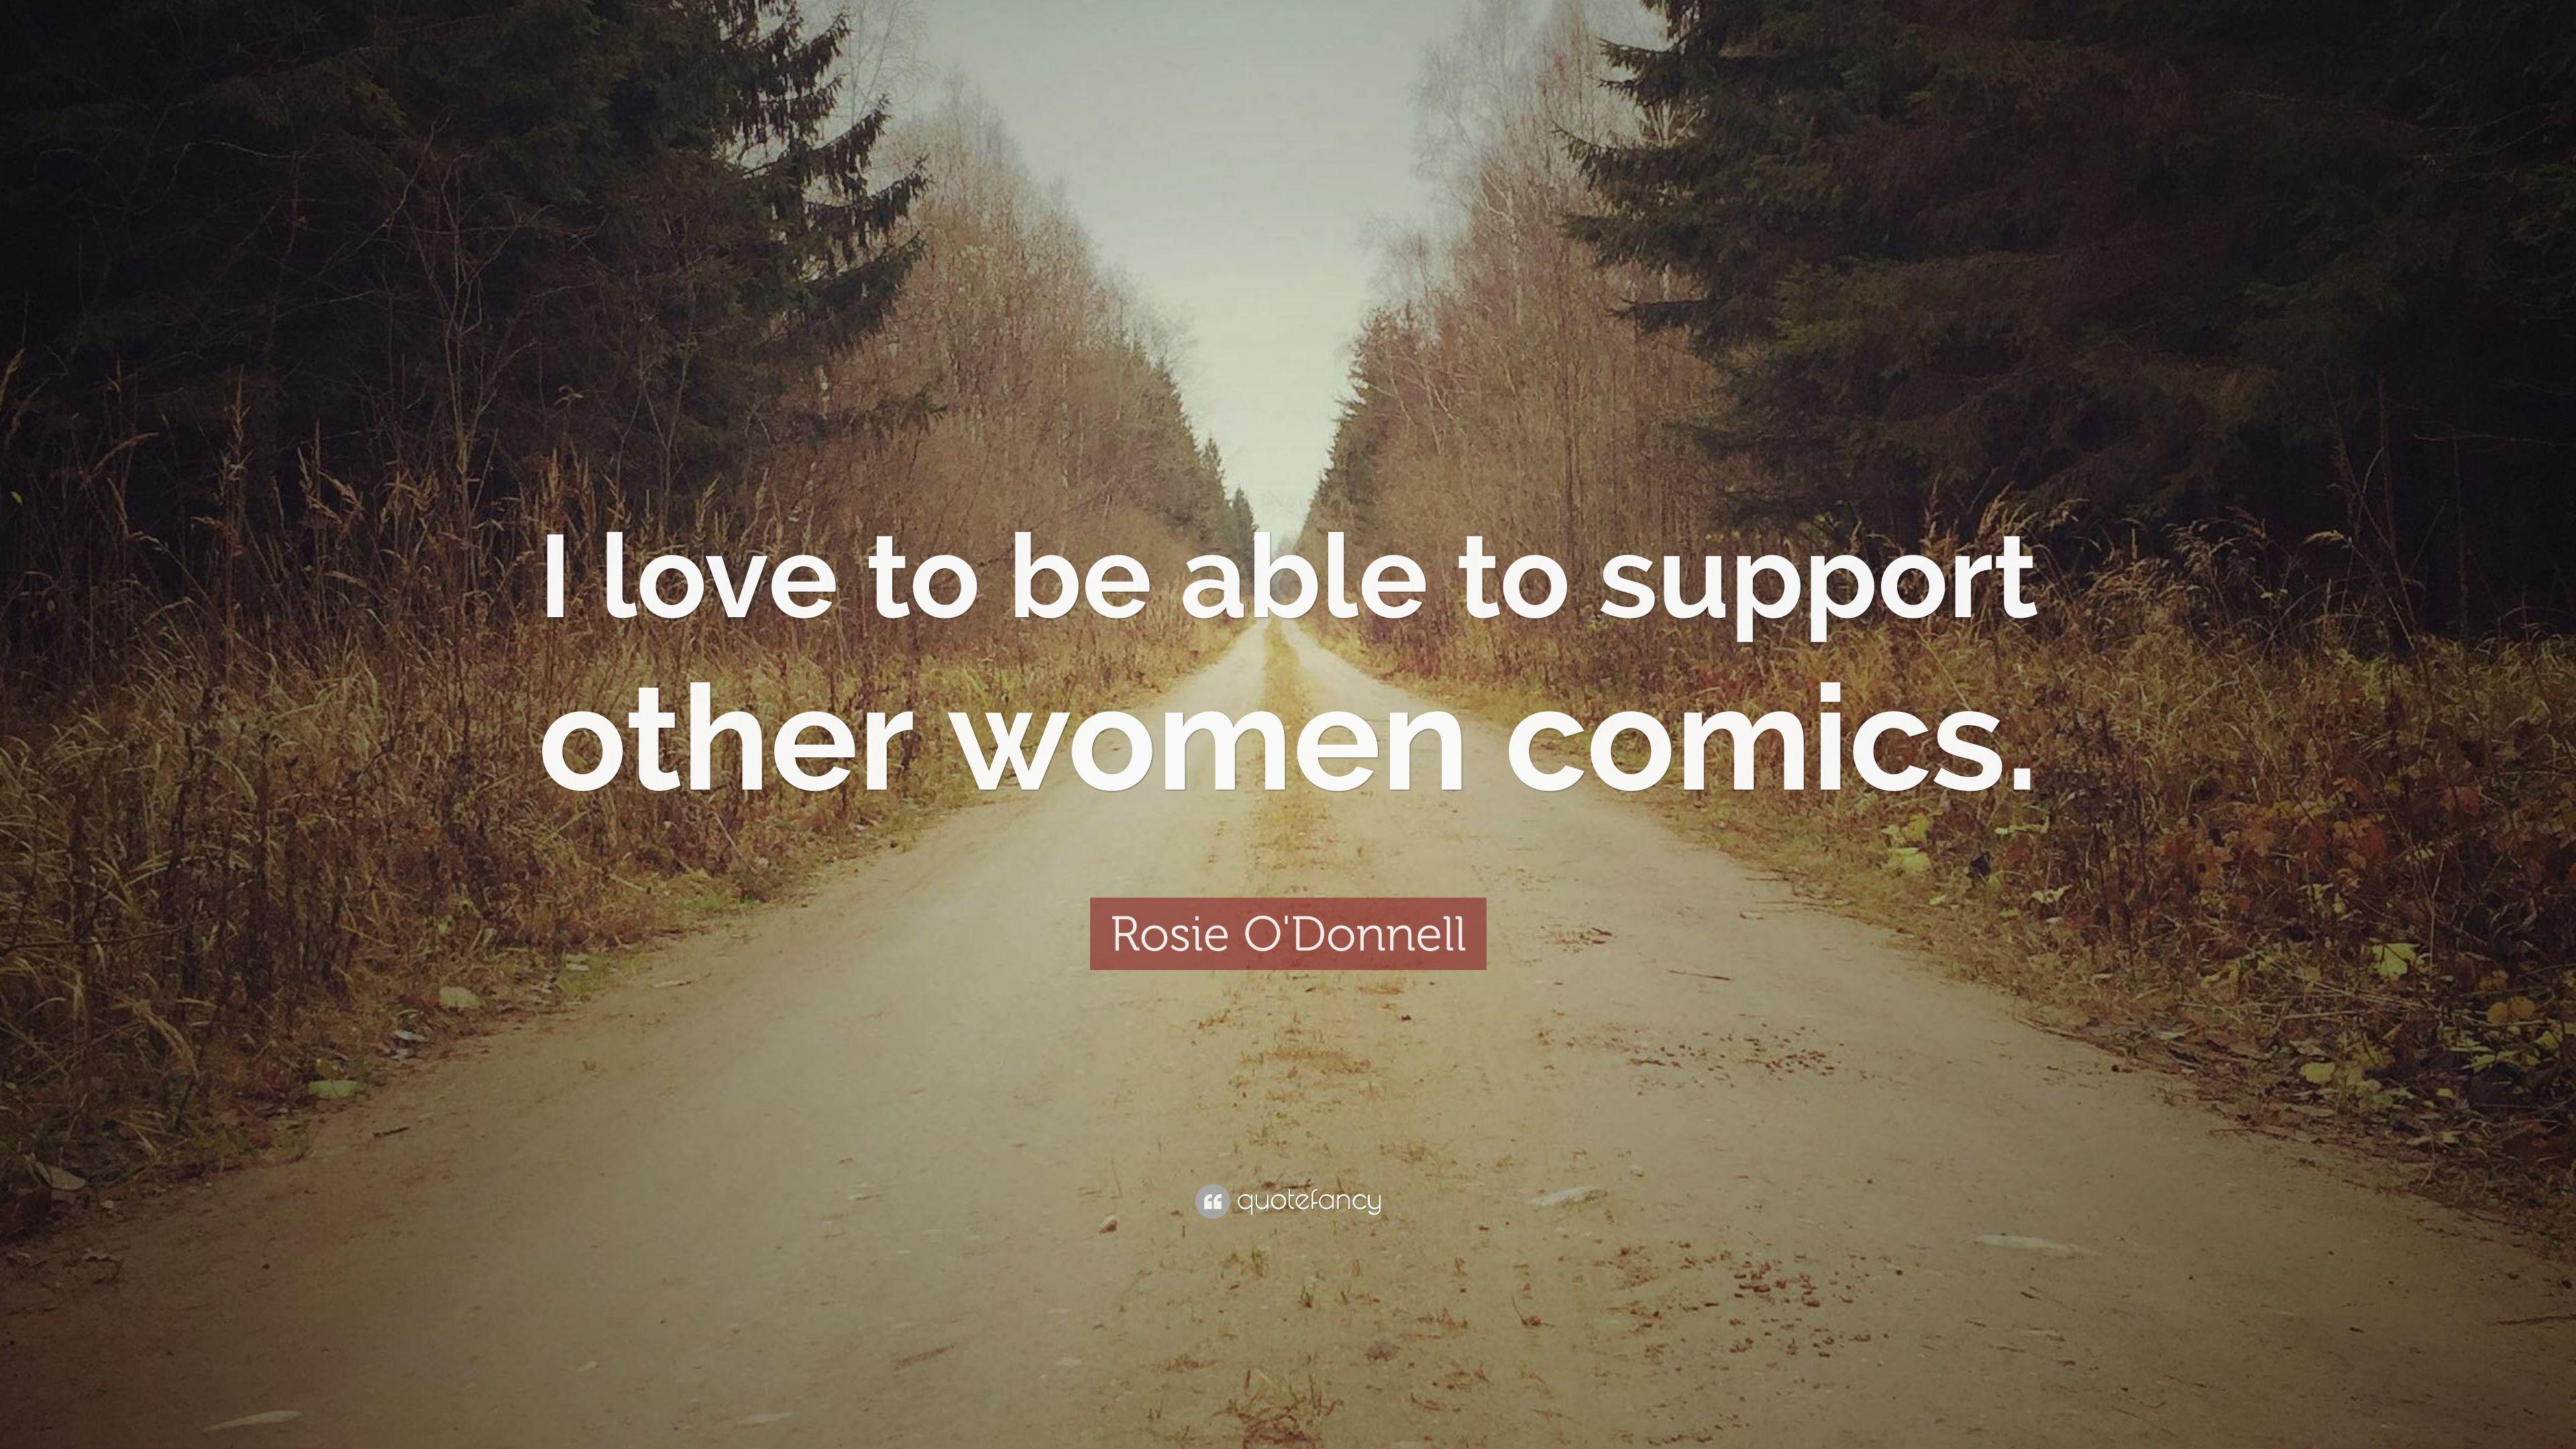 Rosie O'Donnell Quote: “I love to be able to support other women